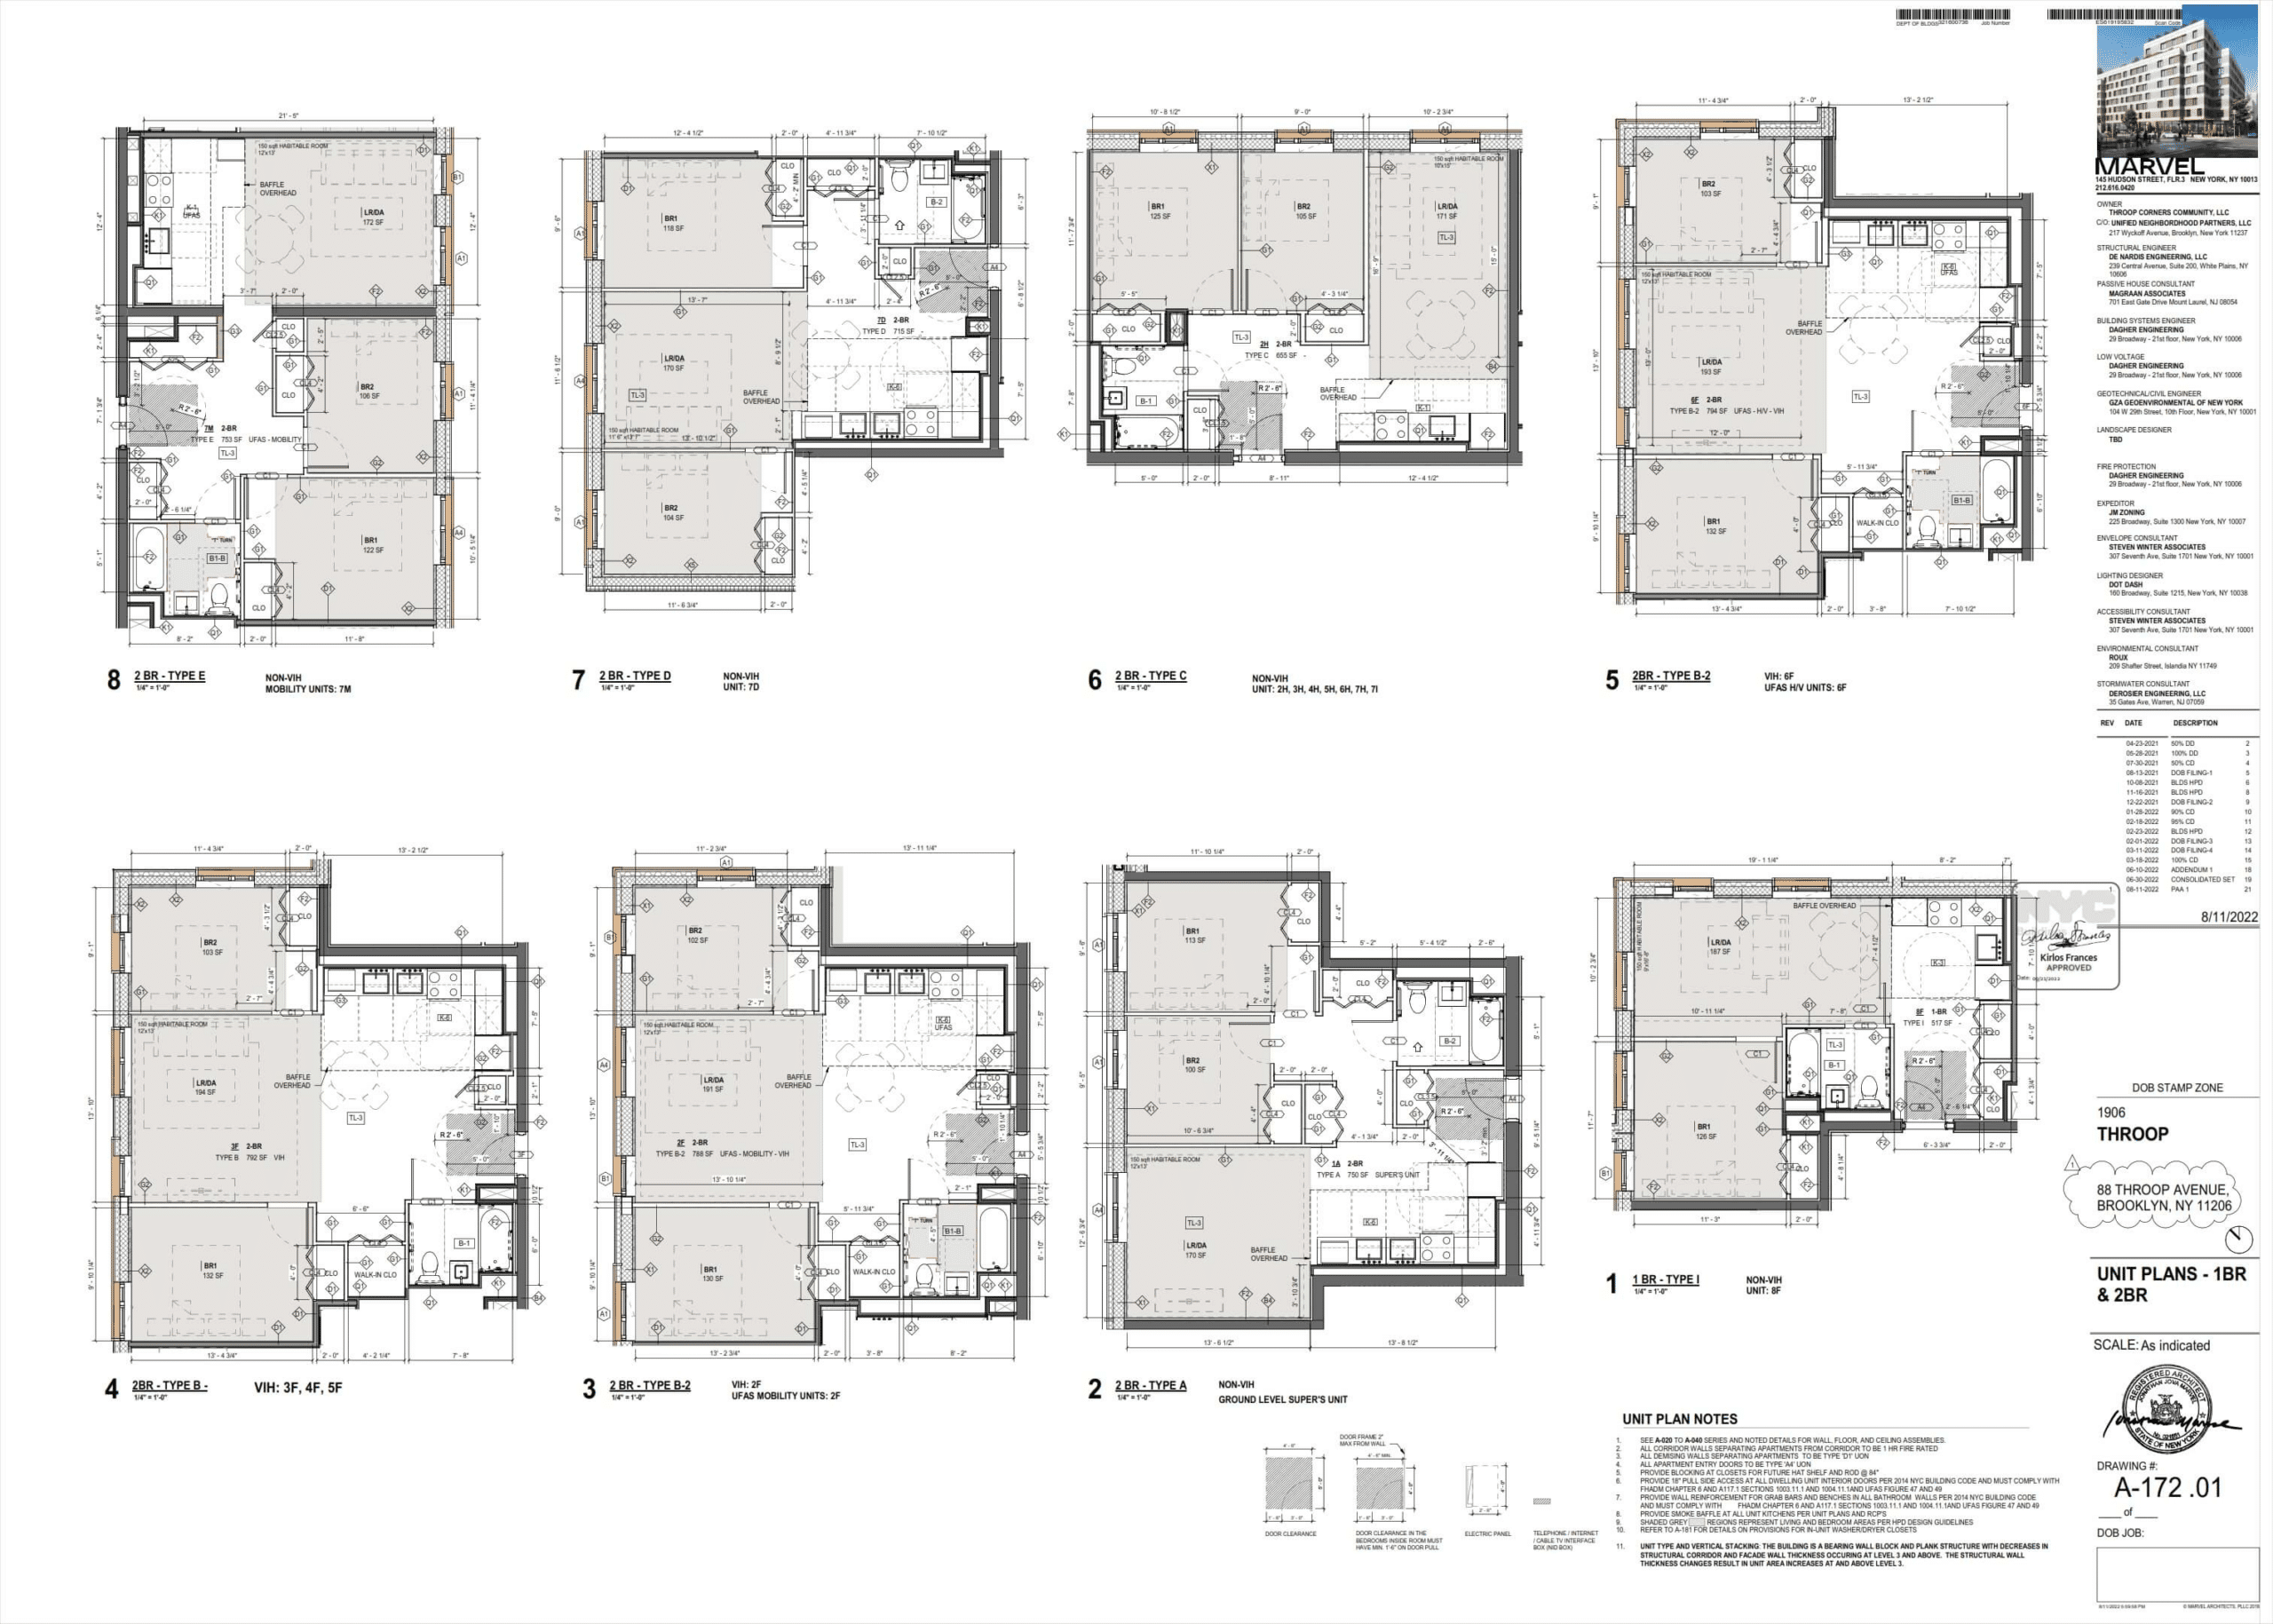 floor plans showing one and two bedroom units